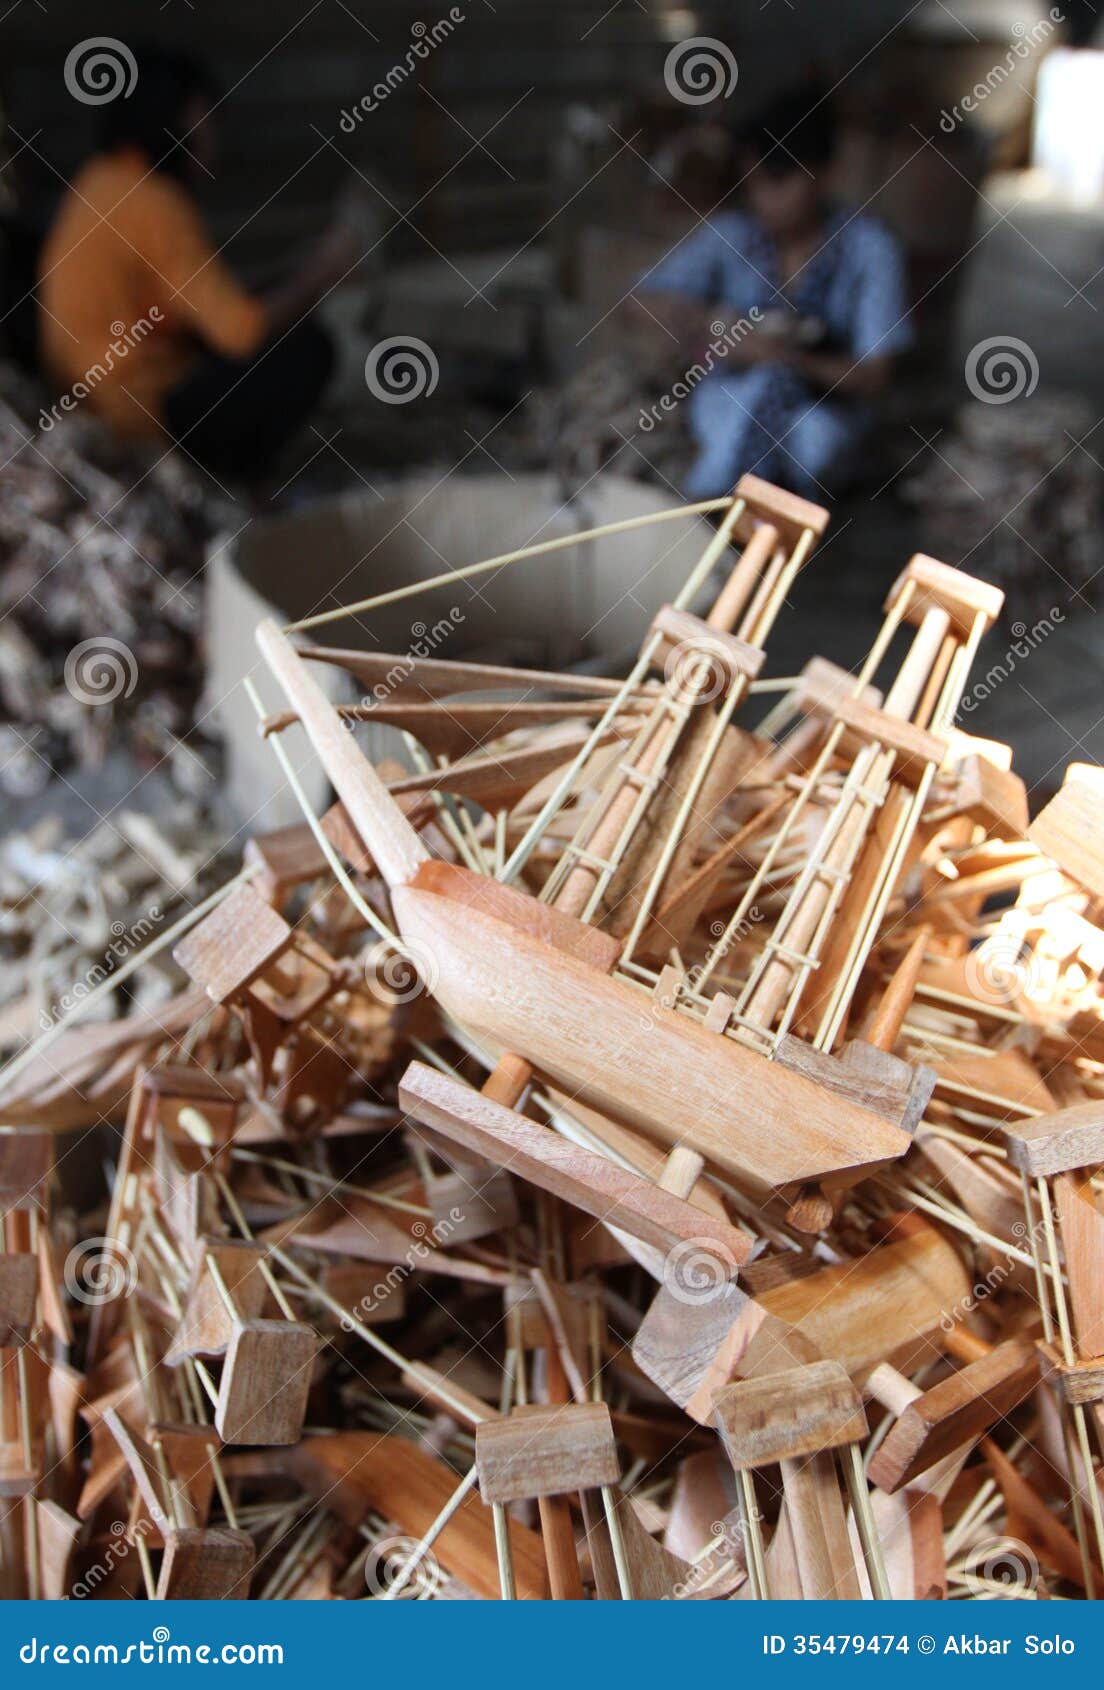 Wood Boat Craft Editorial Stock Image - Image: 35479474